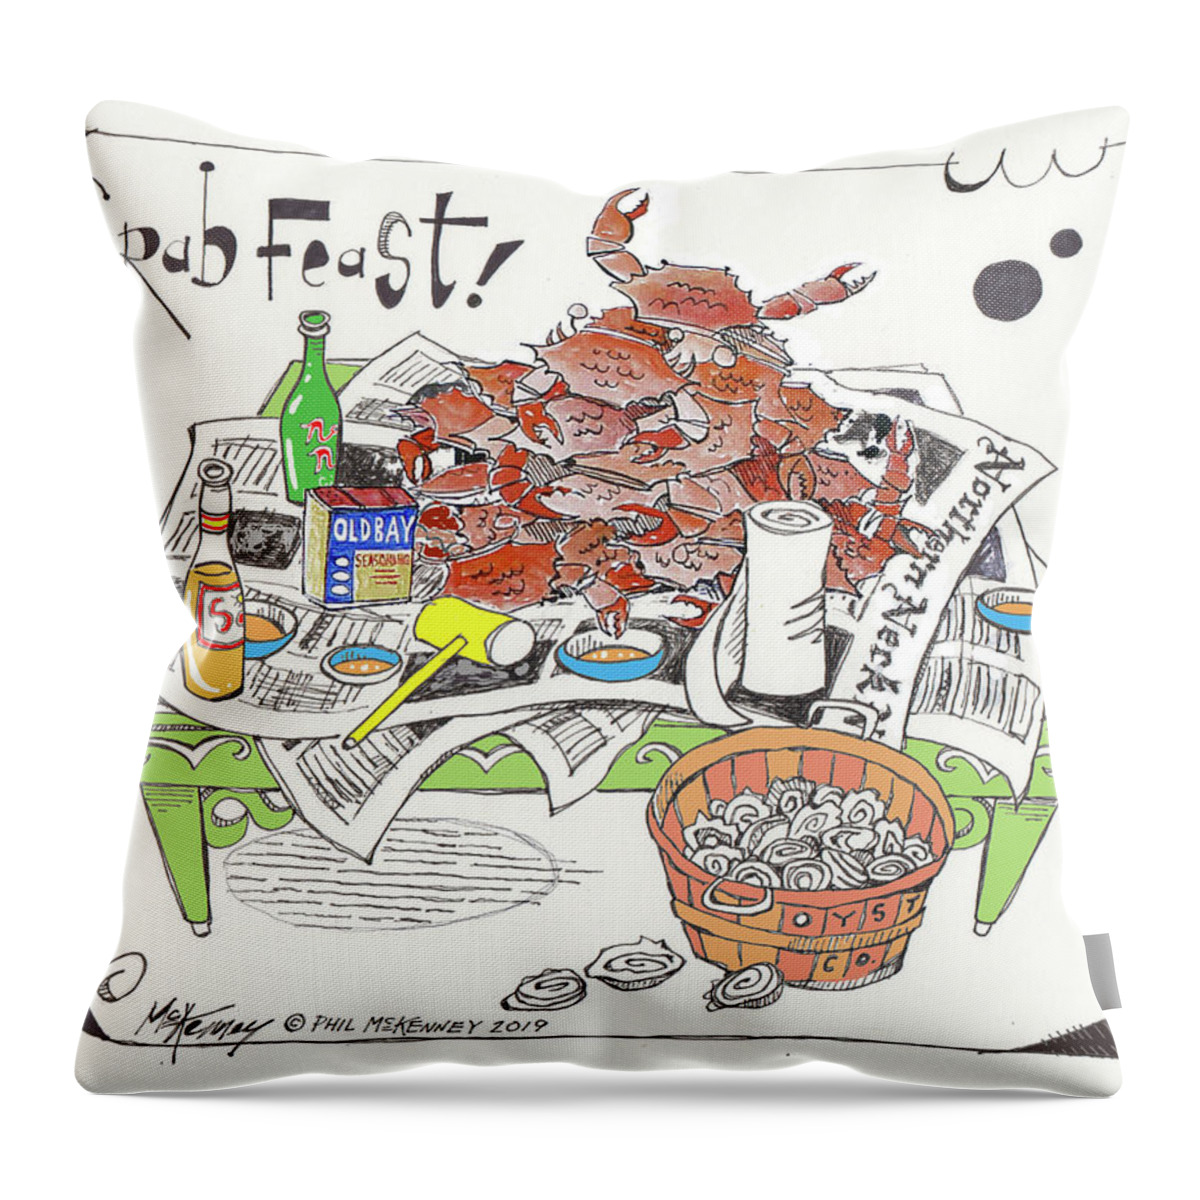  Throw Pillow featuring the drawing Crab Feast by Phil Mckenney